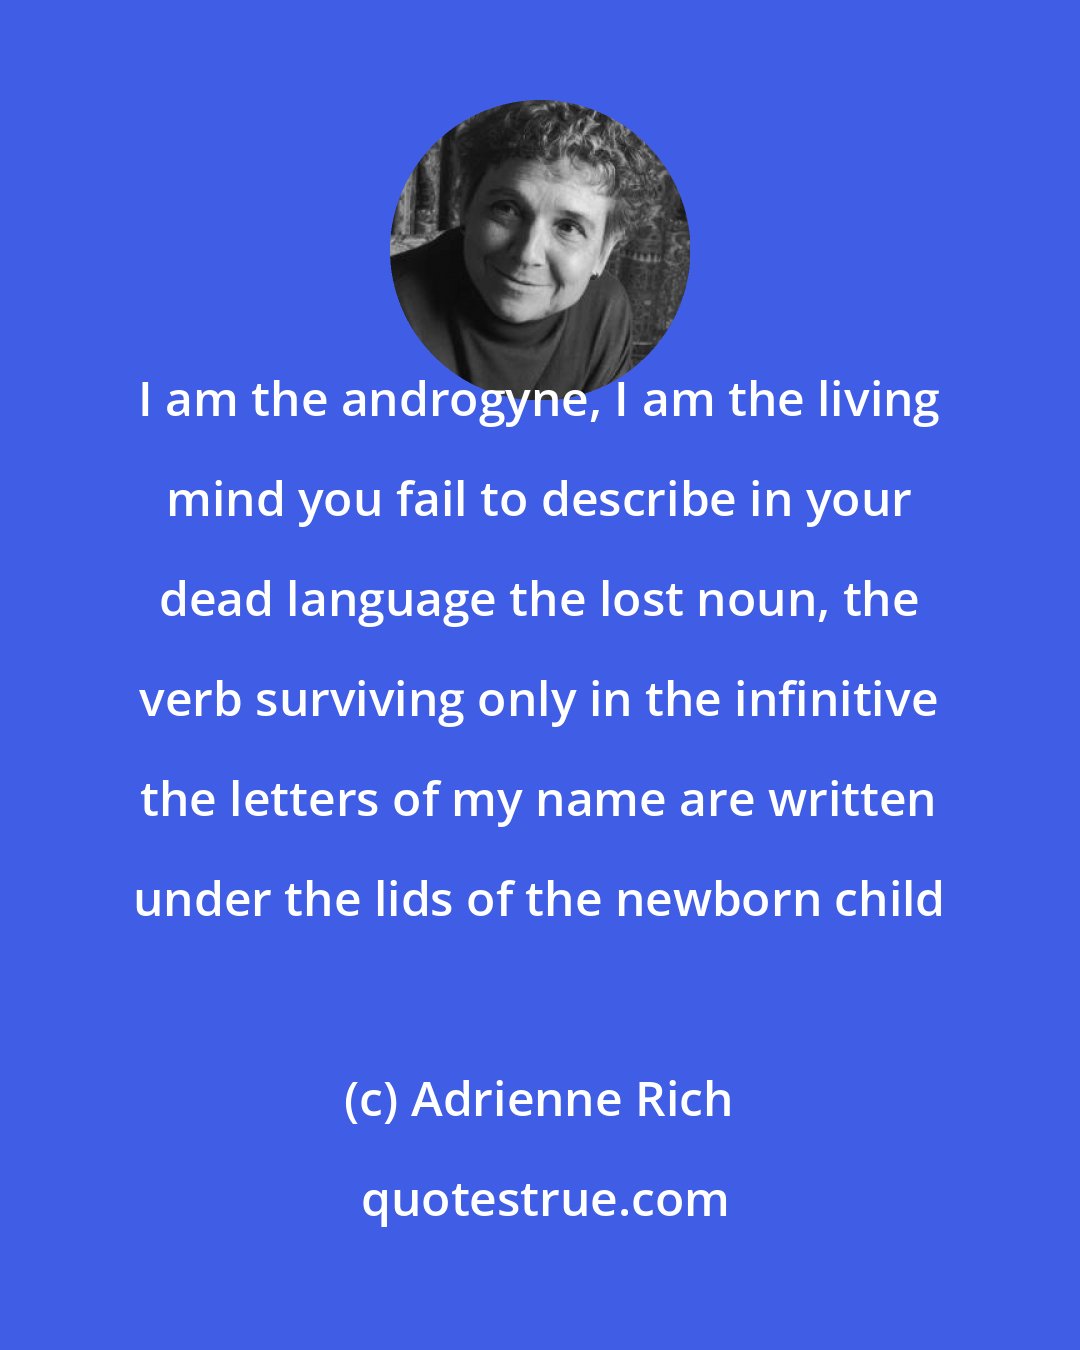 Adrienne Rich: I am the androgyne, I am the living mind you fail to describe in your dead language the lost noun, the verb surviving only in the infinitive the letters of my name are written under the lids of the newborn child